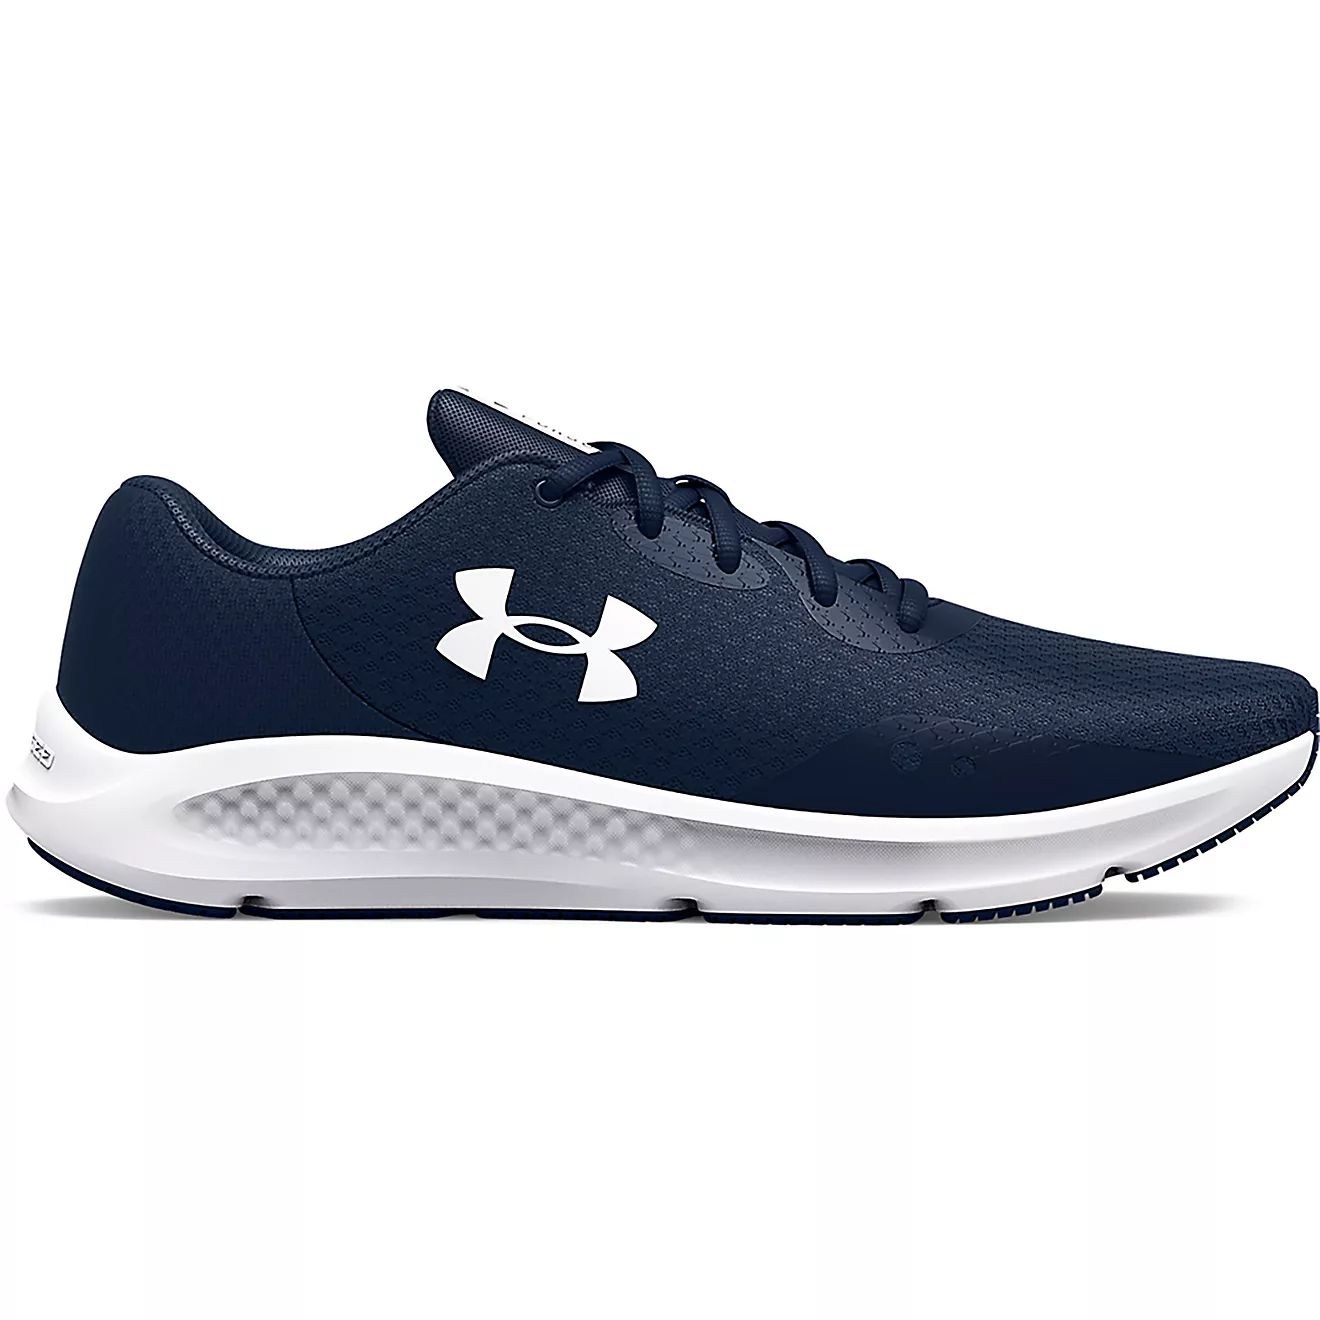 Under Armour Men's Pursuit 3 Running Shoes | Academy Sports + Outdoors